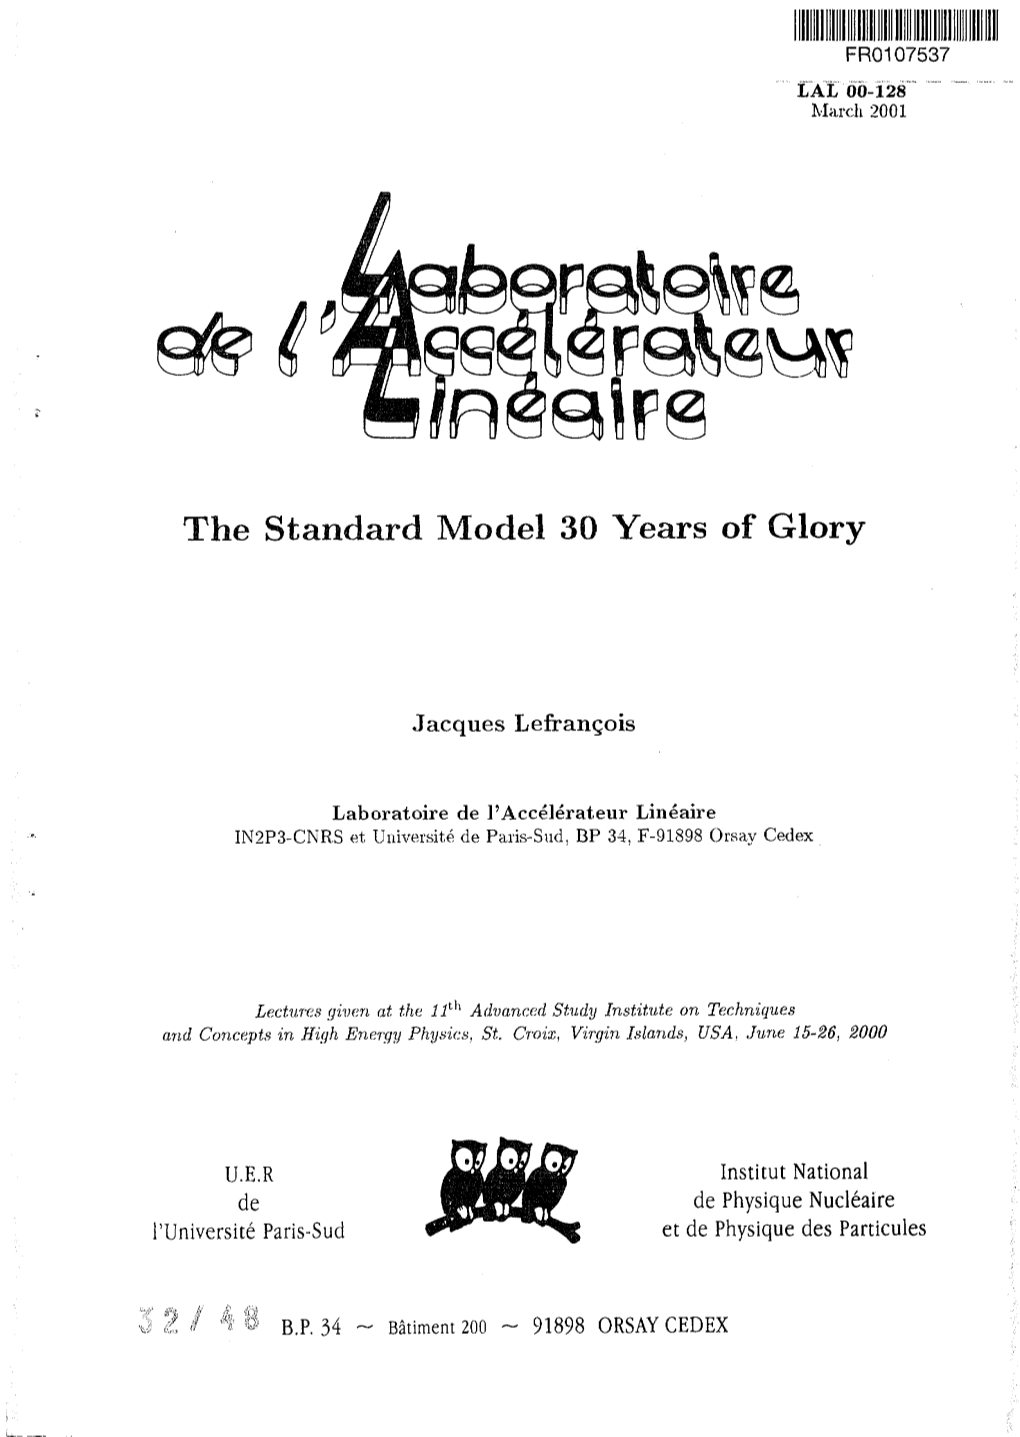 The Standard Model 30 Years of Glory